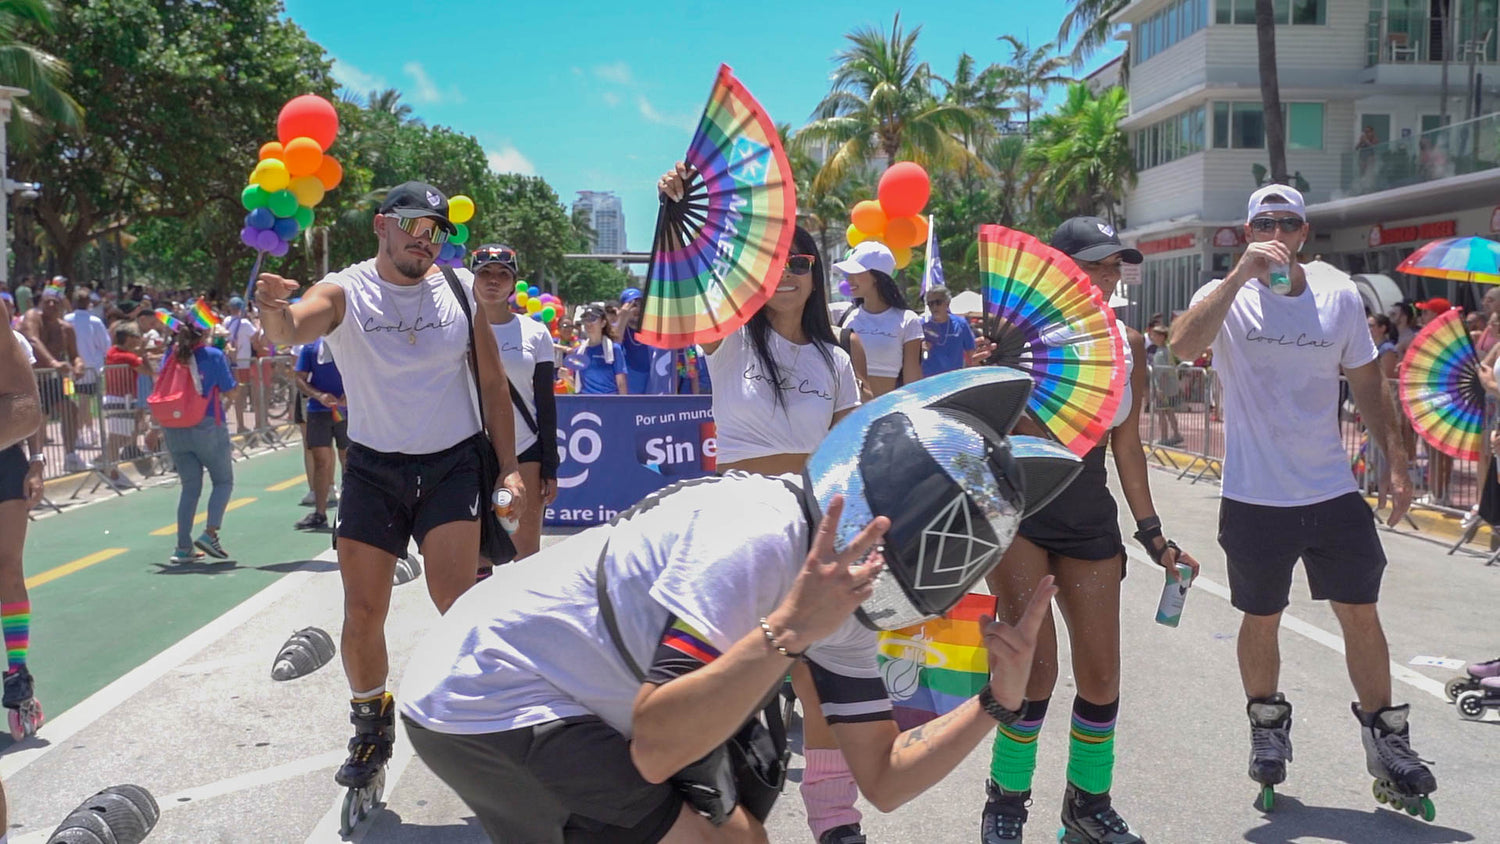 The Cool Cat team skates down the parade at Miami Beach Pride.